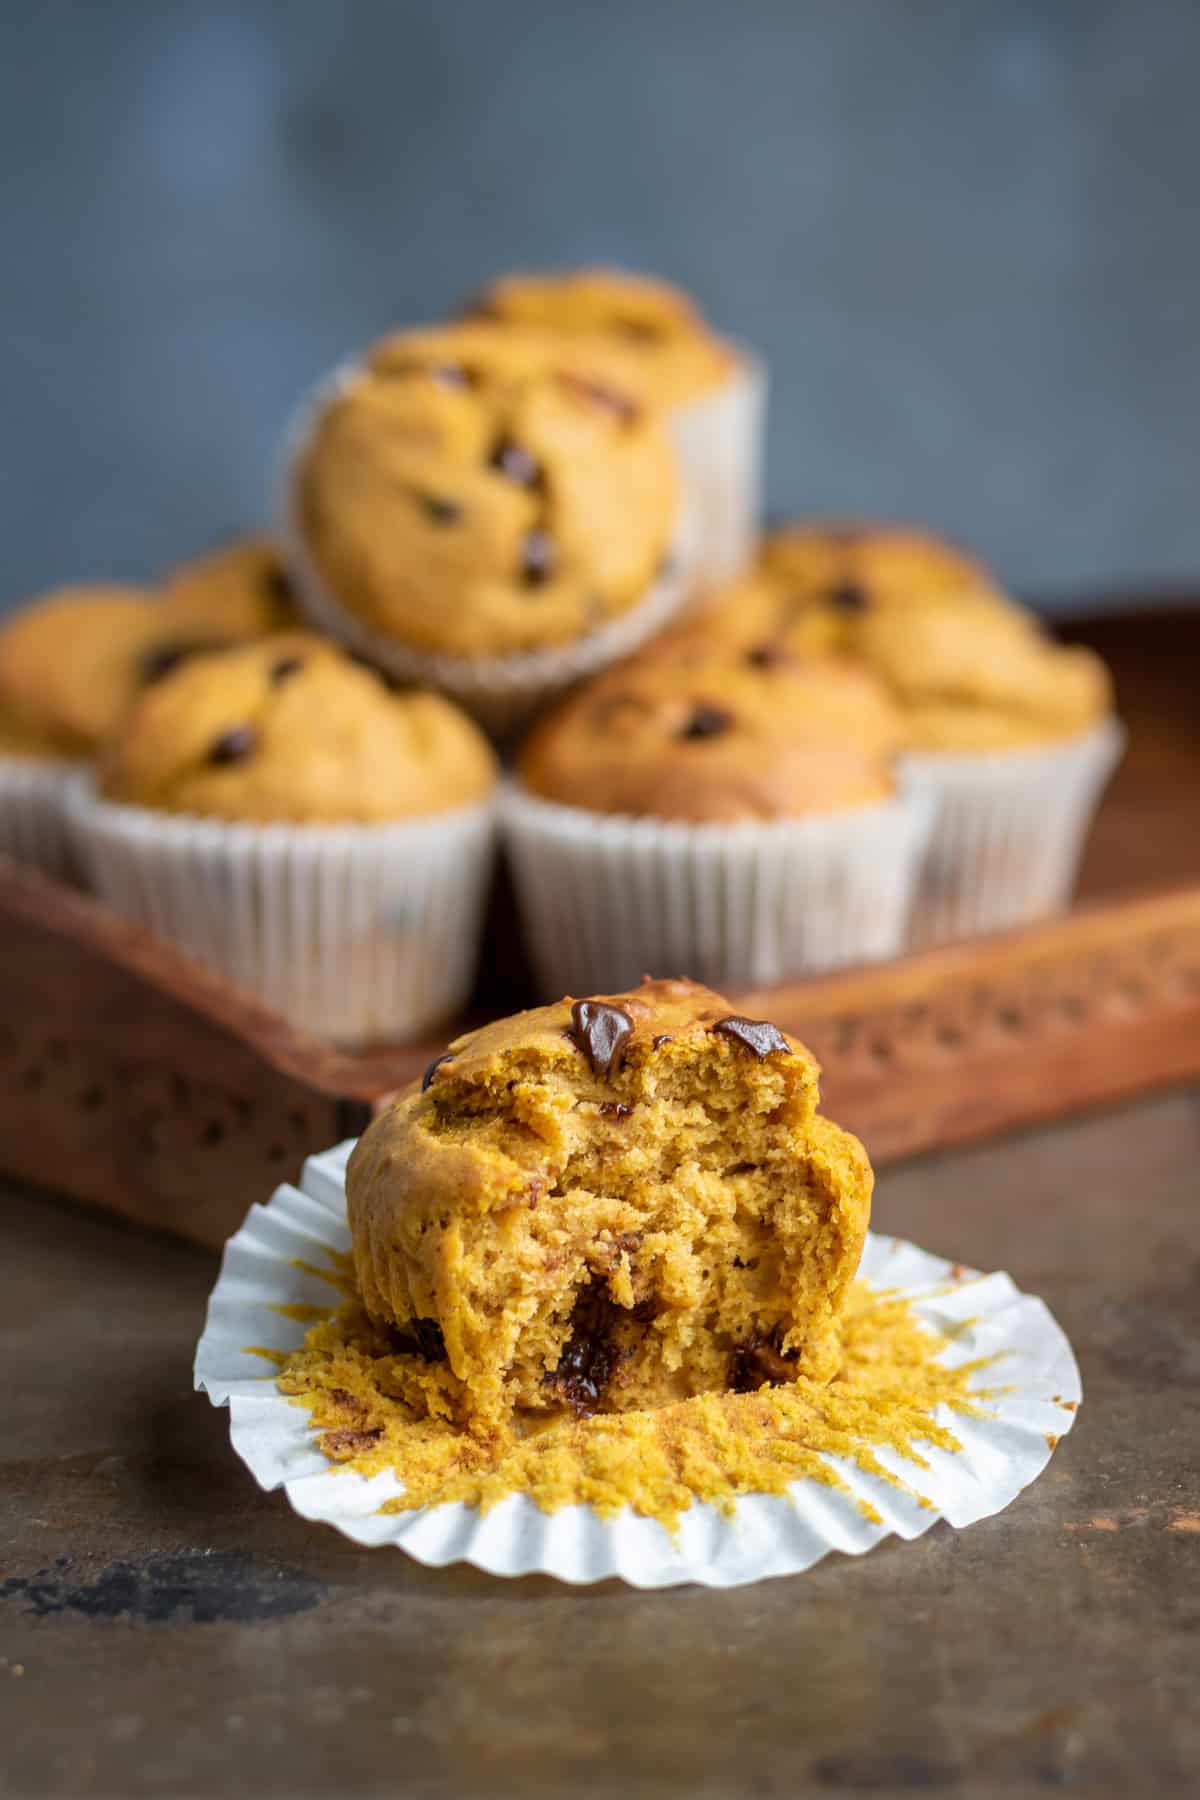 Muffin with a bite out, with a pile of muffins behind it.